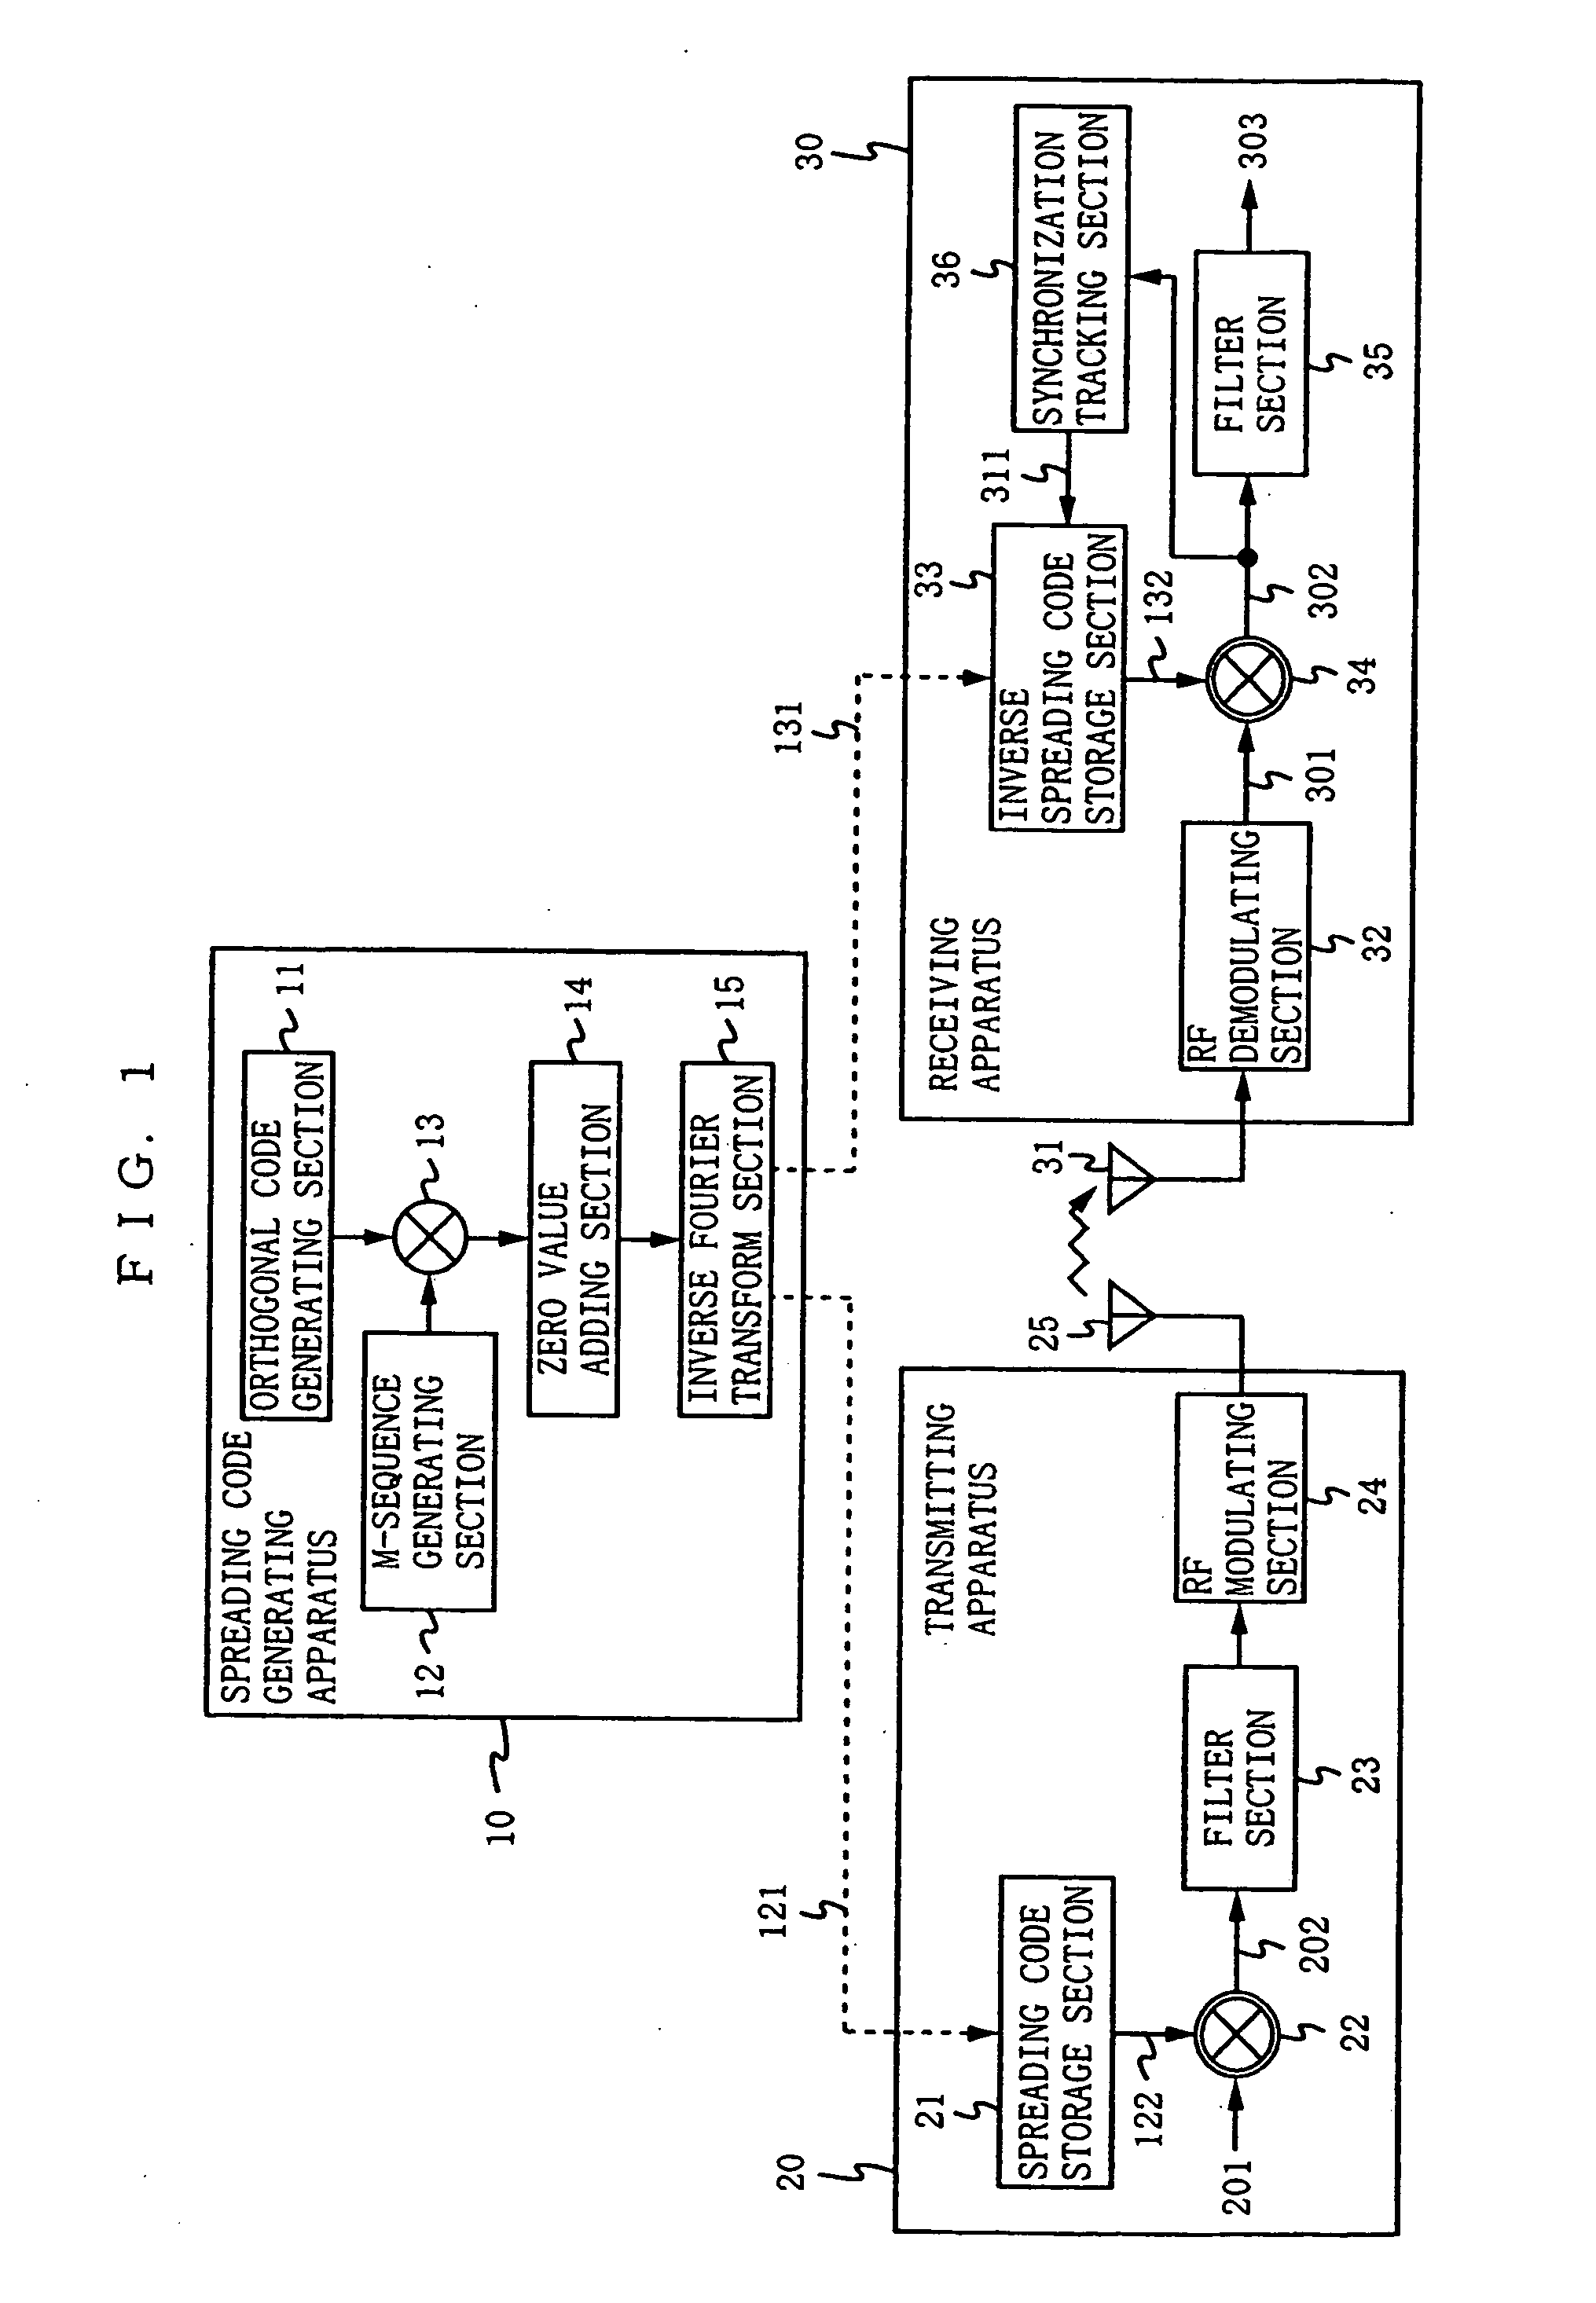 System and method for spread spectrum communication